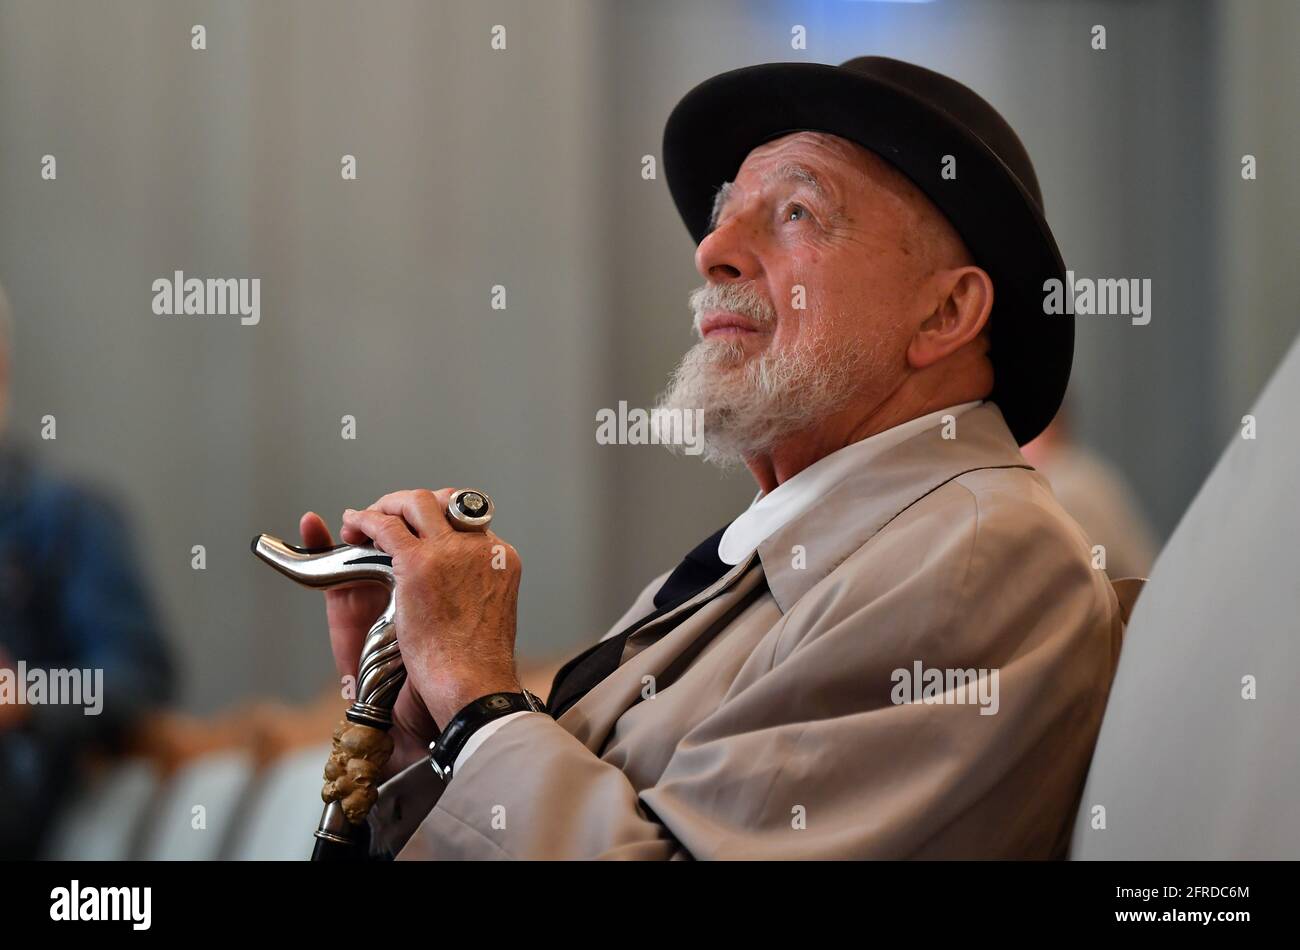 Meiningen, Germany. 19th May, 2021. Markus Lüpertz, painter and sculptor, is sitting in the auditorium of the Staatstheater Meiningen. He will bring the opera 'La Bohème' by composer Giacomo Puccini (1885-1924) to the Meiningen stage. In addition to stage design and costume design, the 80-year-old will also be responsible for directing for the first time. The premiere of this opera production is scheduled for 10 December. Credit: Martin Schutt/dpa-Zentralbild/dpa/Alamy Live News Stock Photo